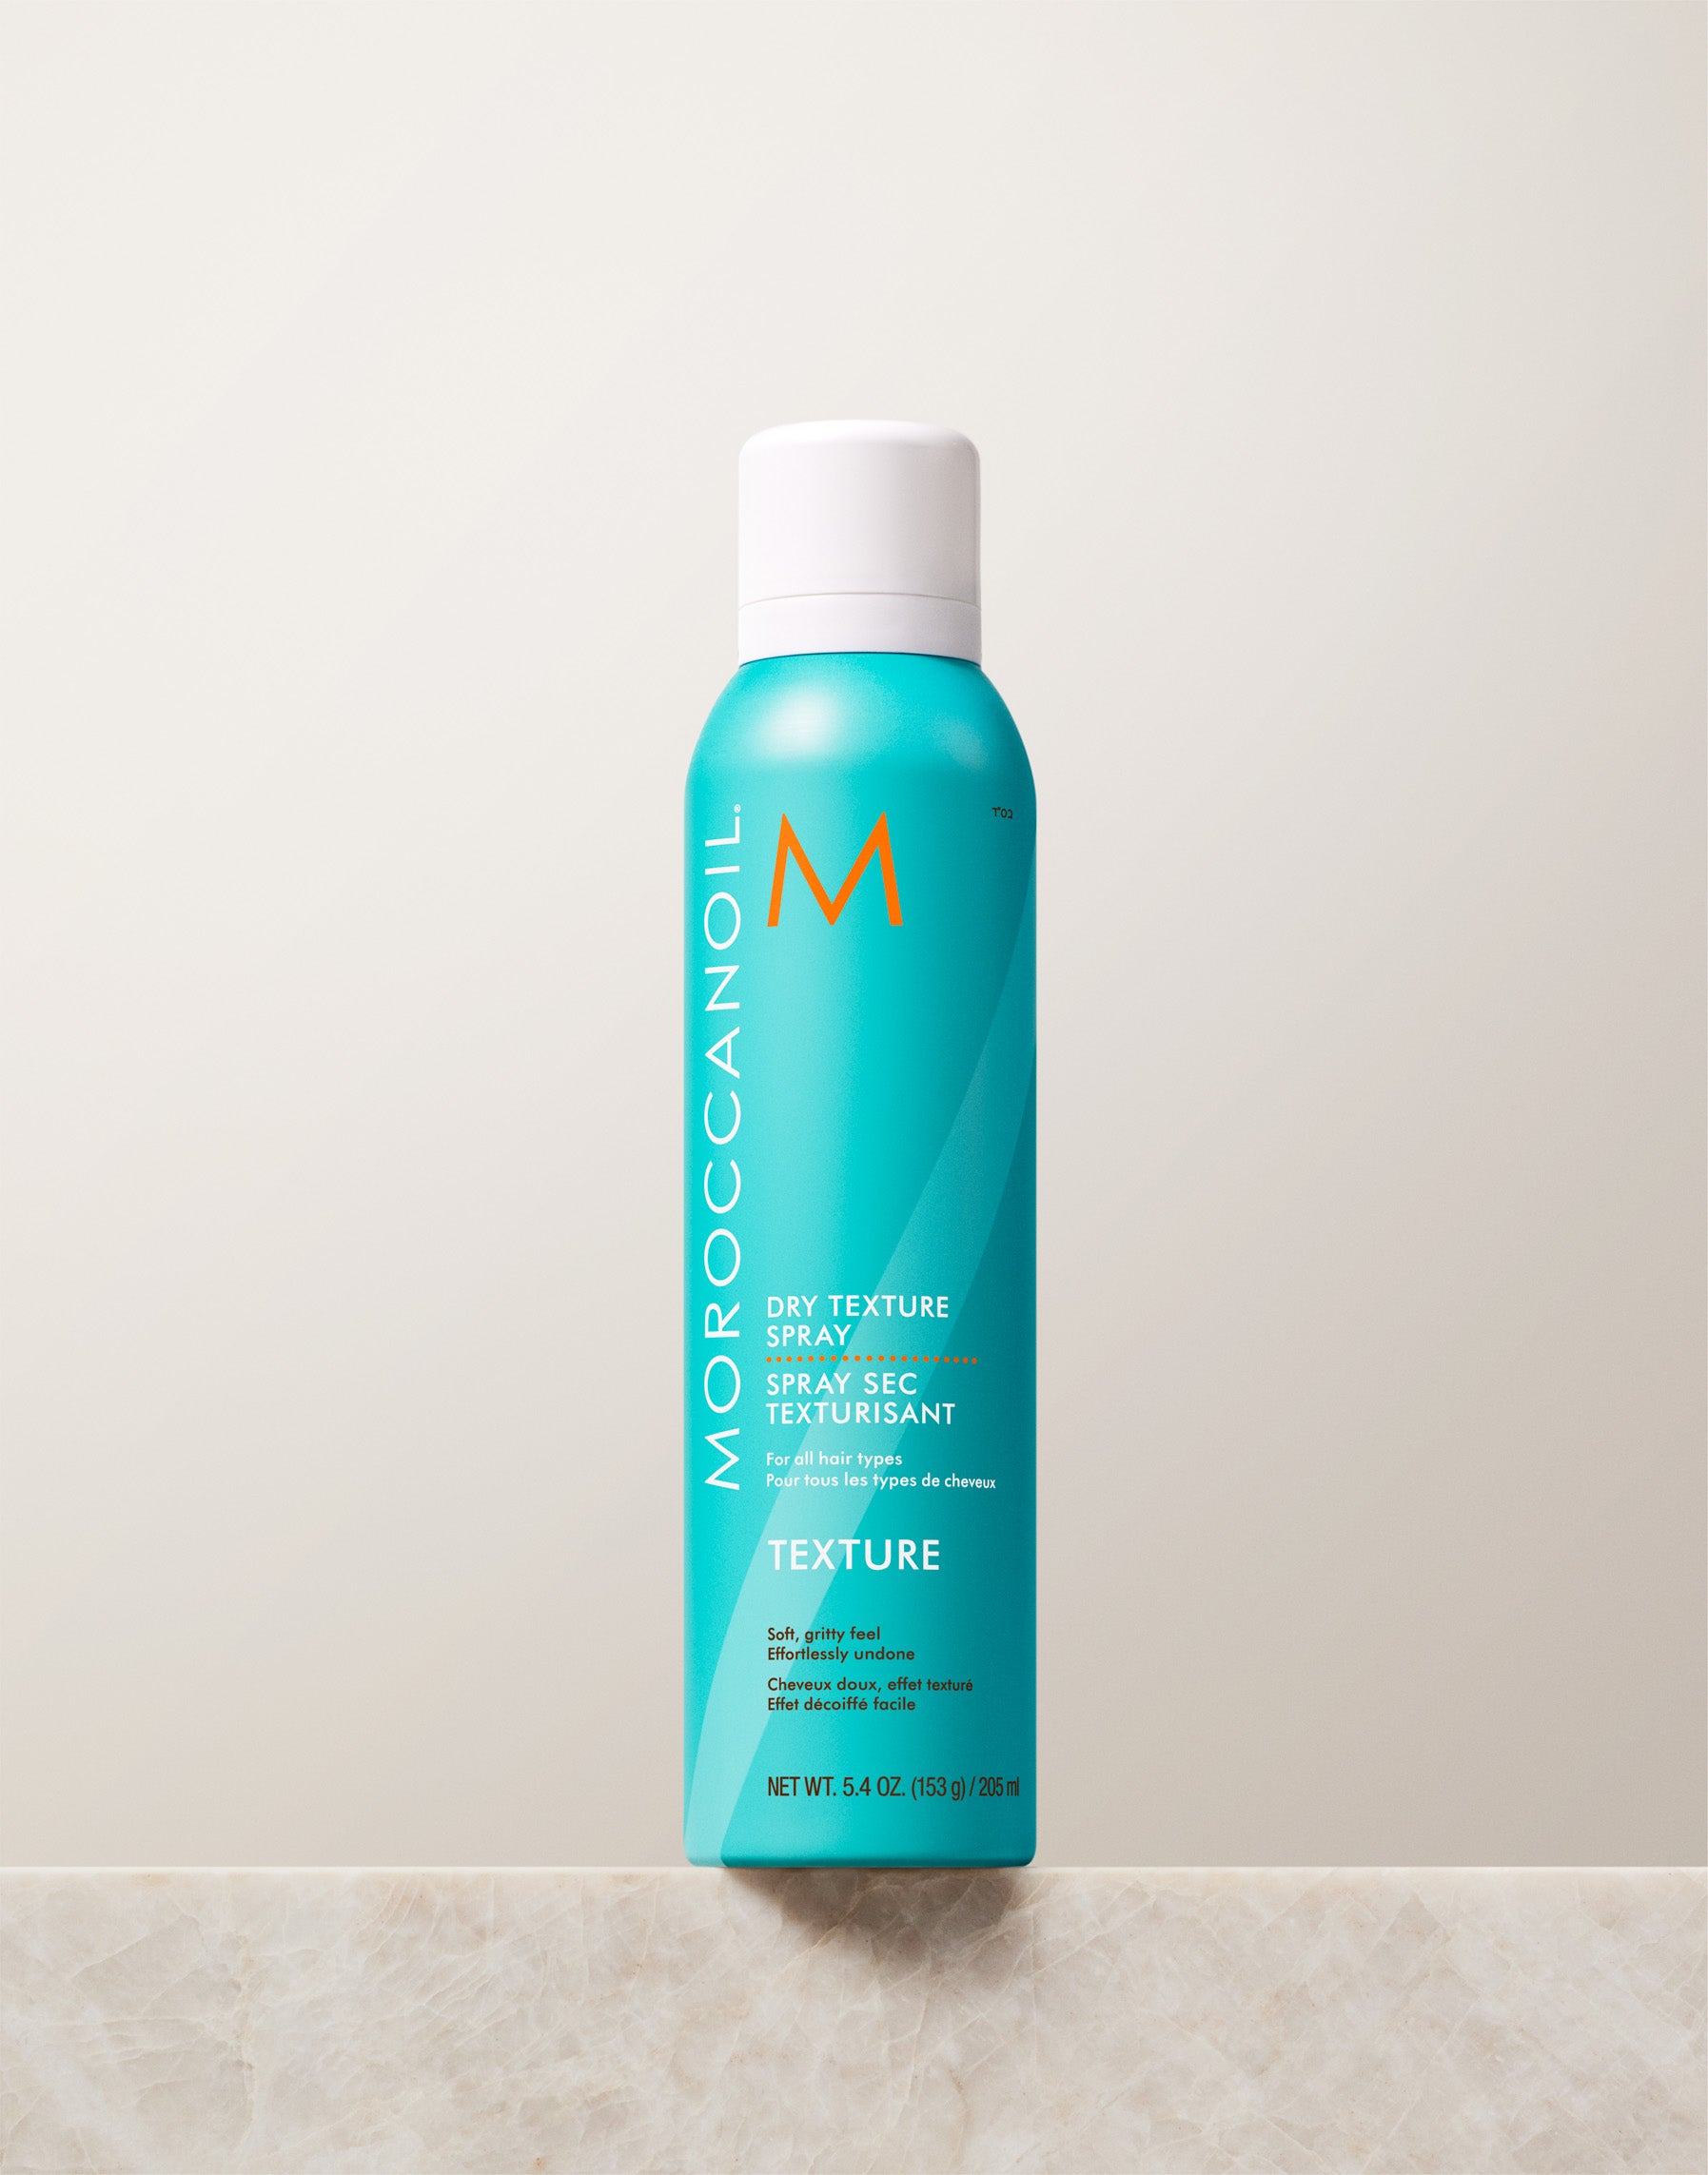 BEST TEXTURE SPRAY FOR HAIR, Which Is The Best Texture Spray